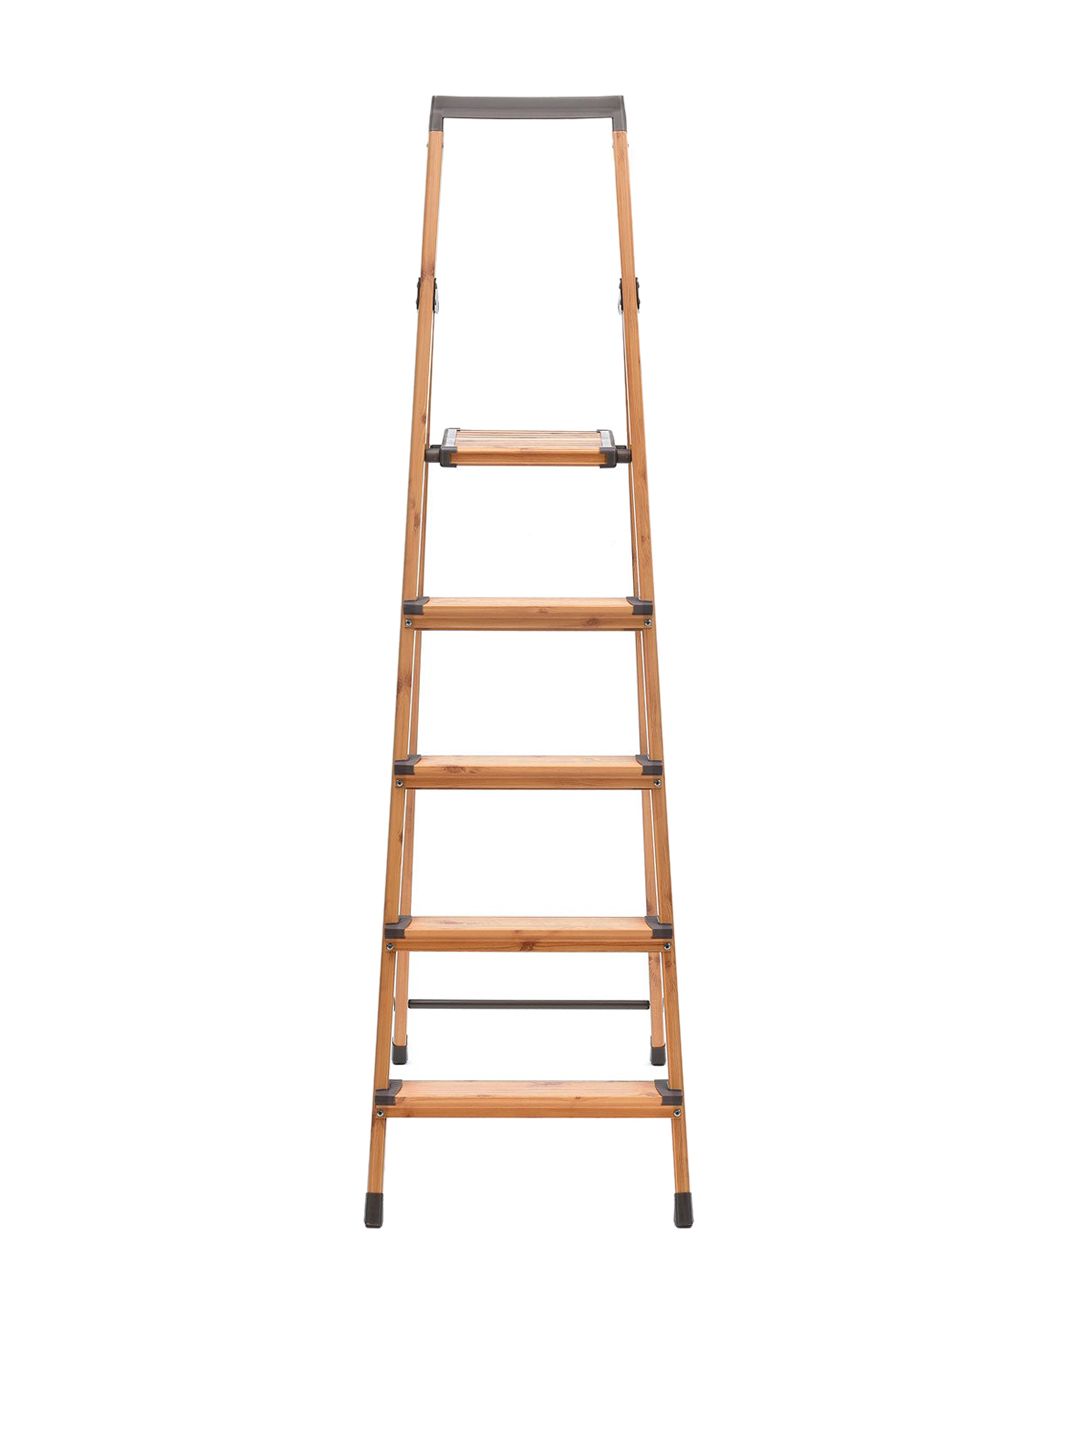 Athome by Nilkamal Brown 5 Steps Aluminum Step Ladder With Wooden Finish Price in India